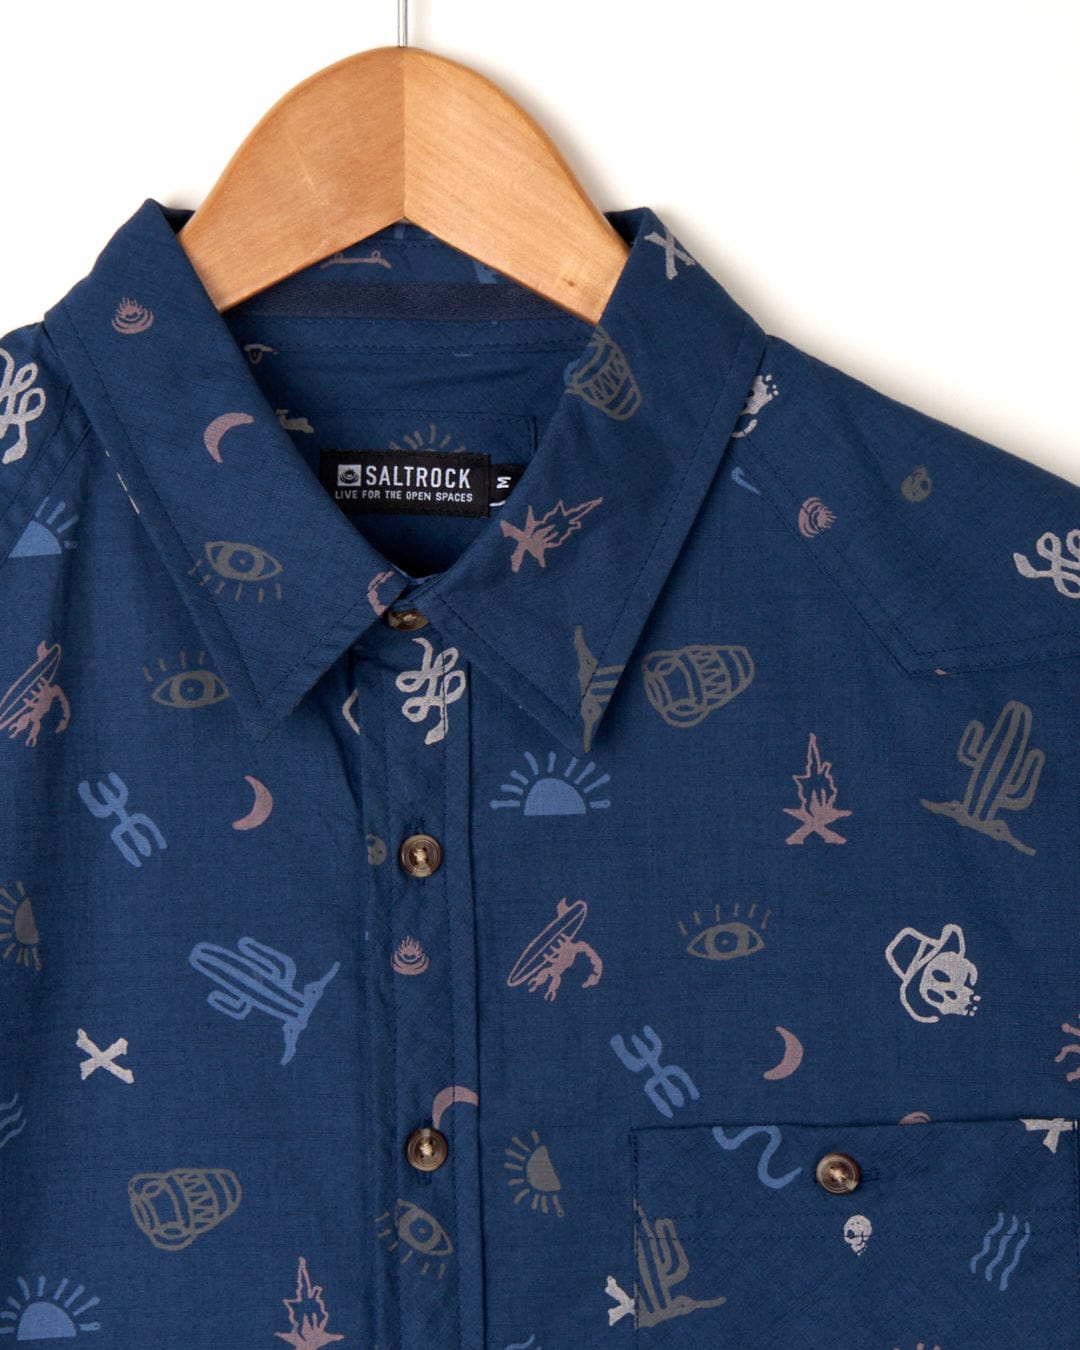 A Saltrock Last Stop - Mens Short Sleeve Shirt - Blue with a cactus print on it.